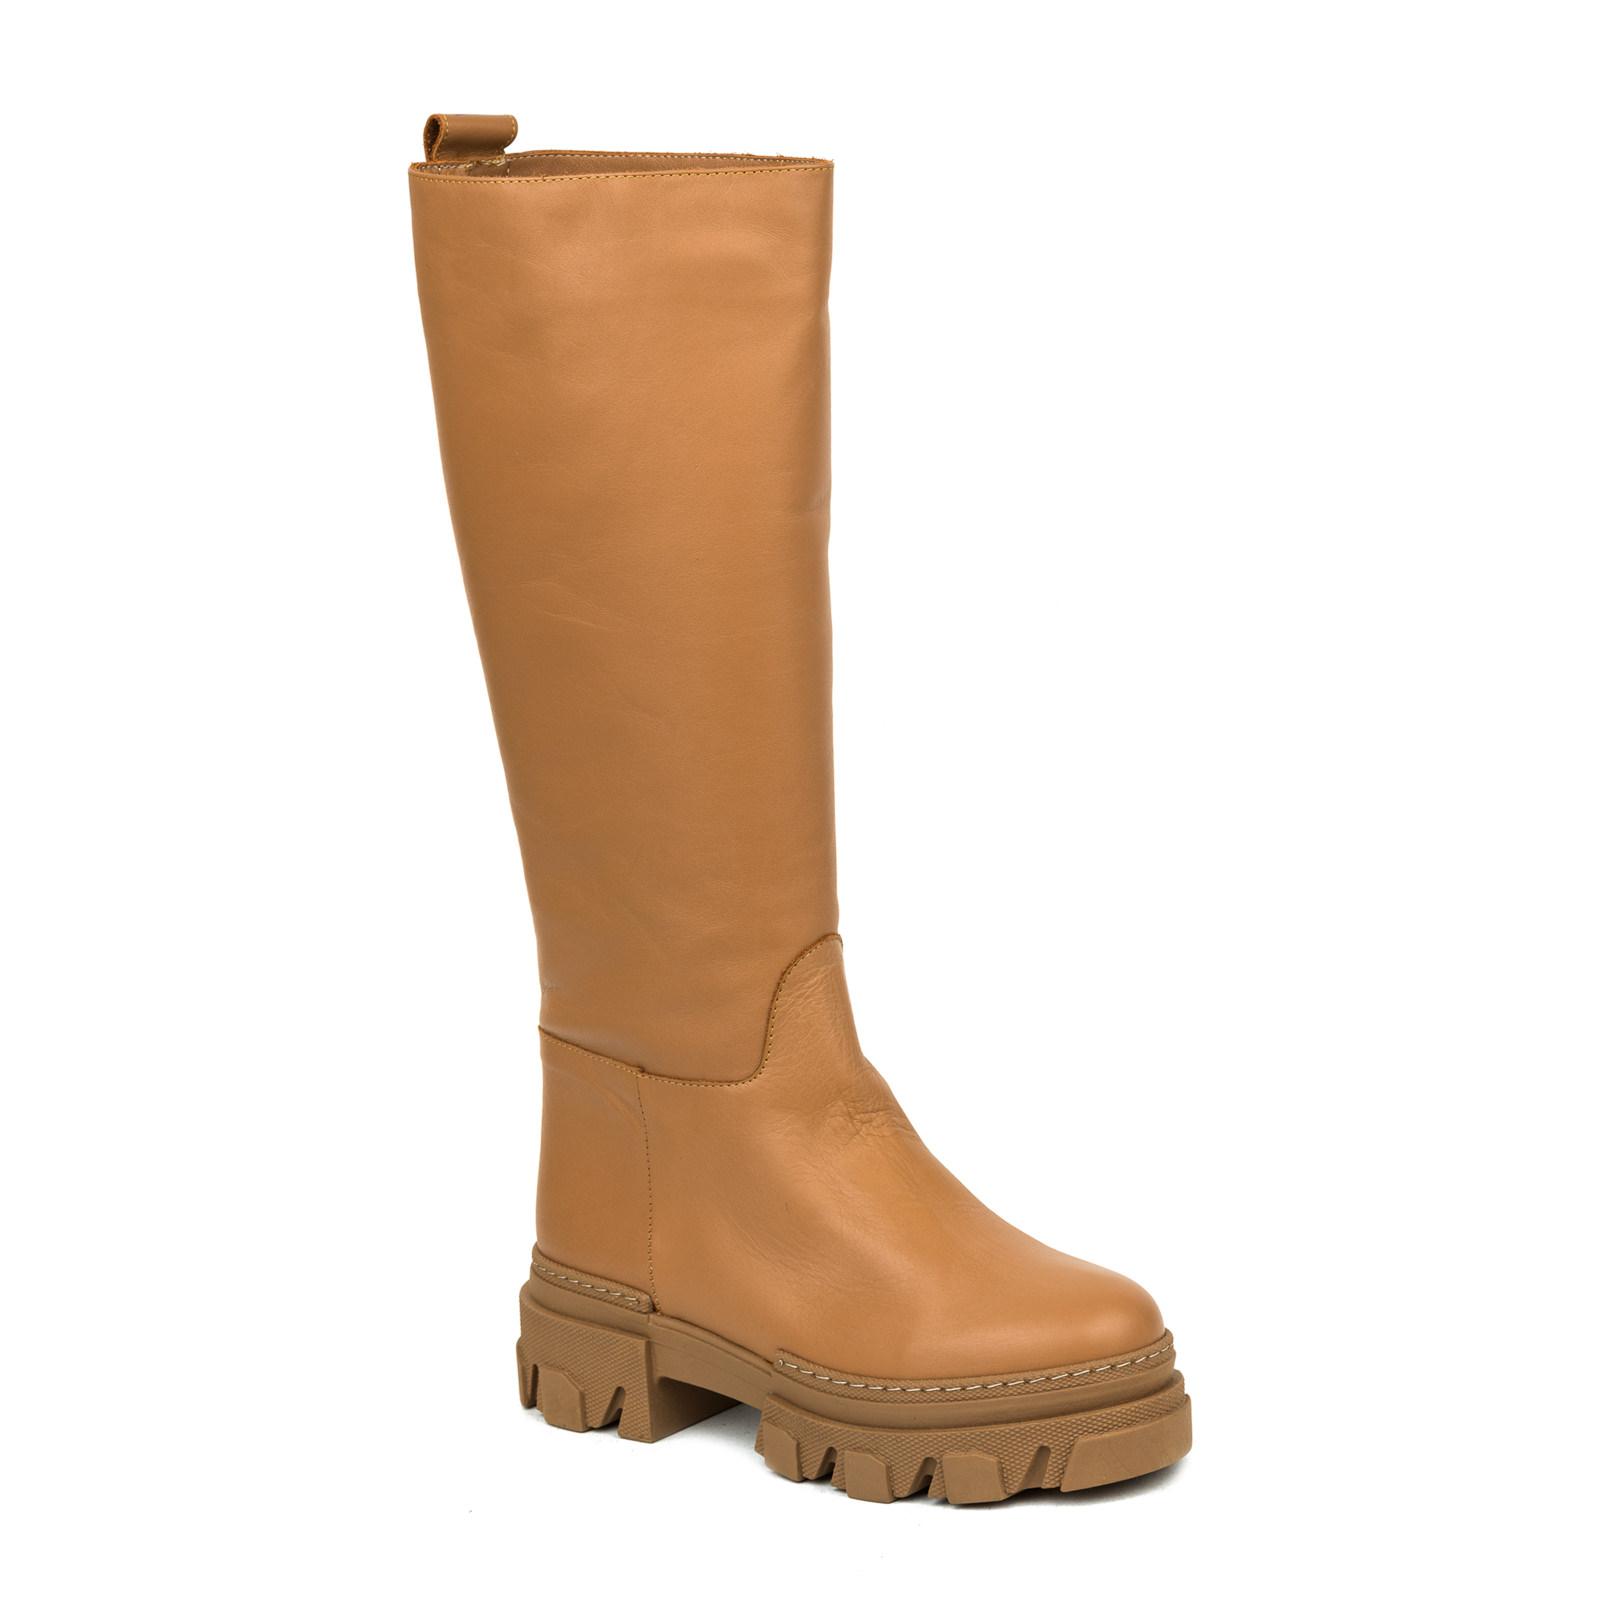 Leather WATERPROOF boots B128 - CAMEL